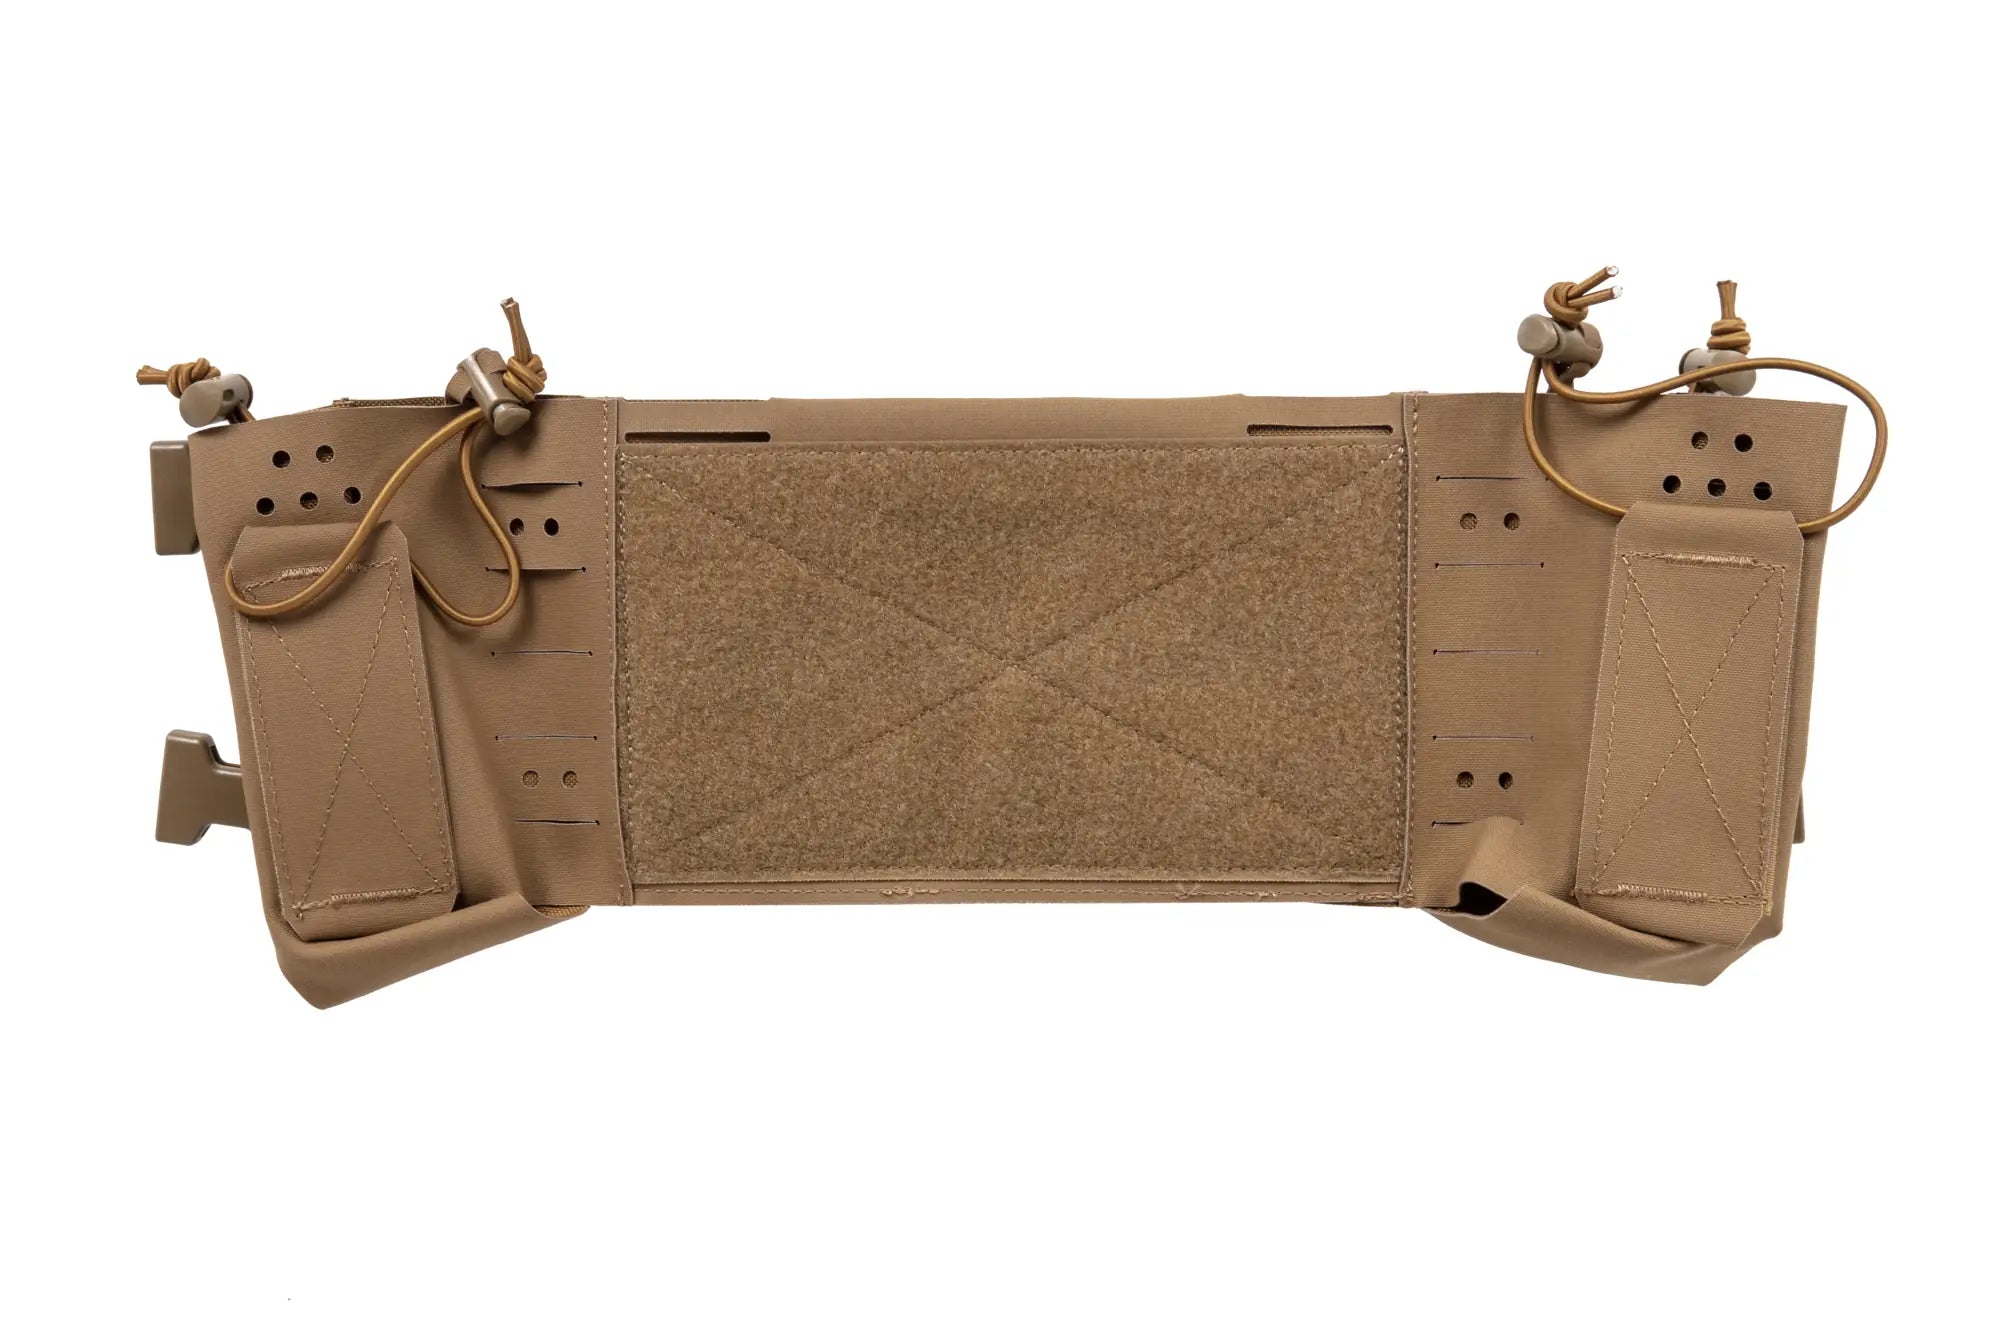 Wosport Chassis I administration panel for the Chest Rig MK4 Coyote Brown waistcoat-1